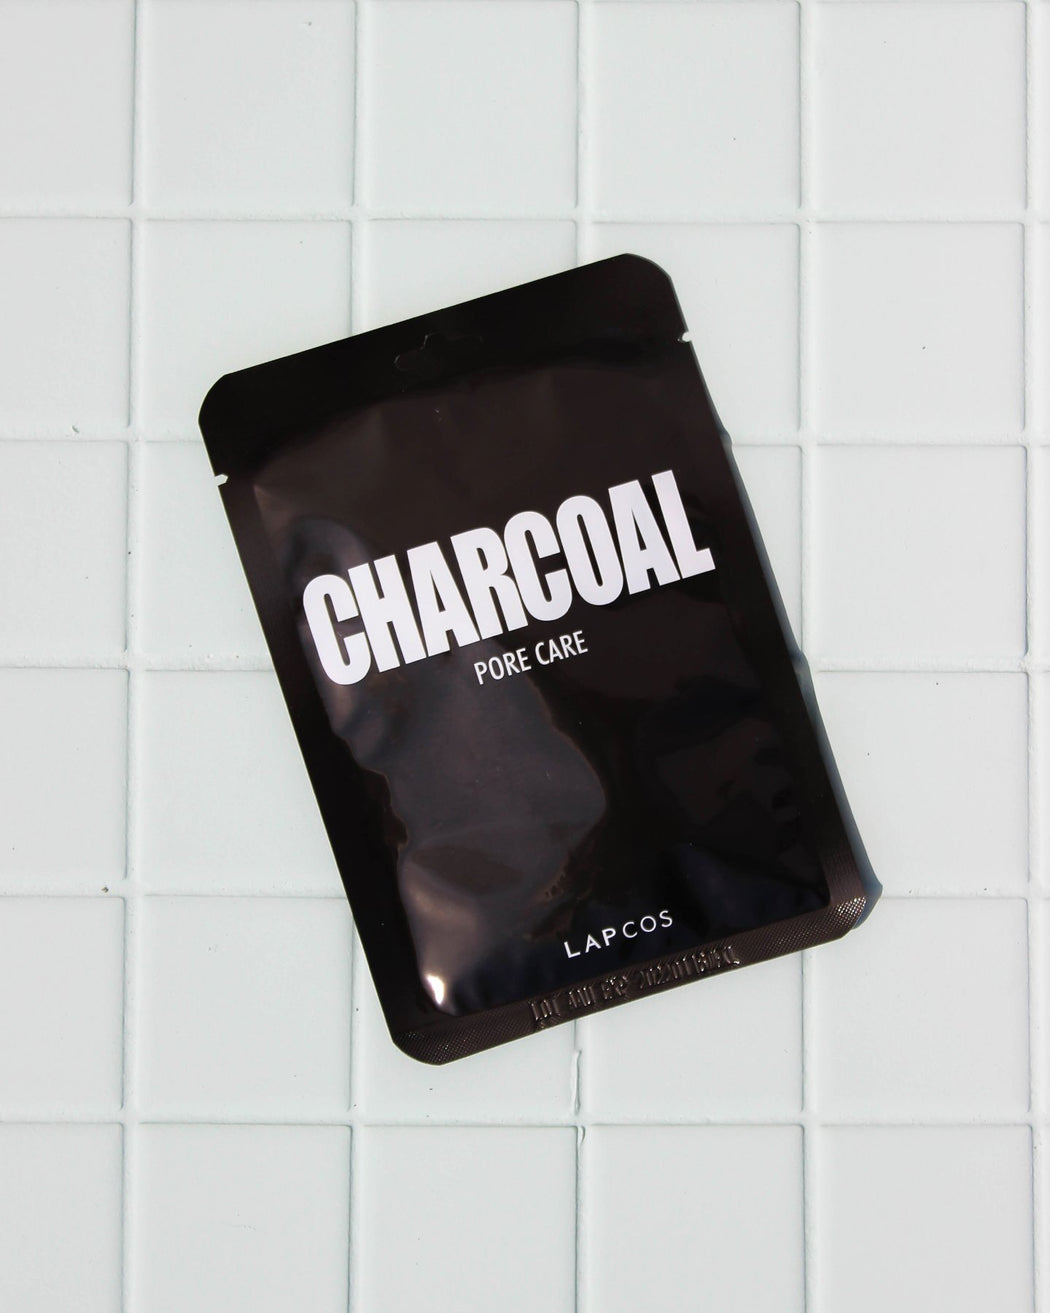 LAPCOS - Charcoal Daily Sheet Mask